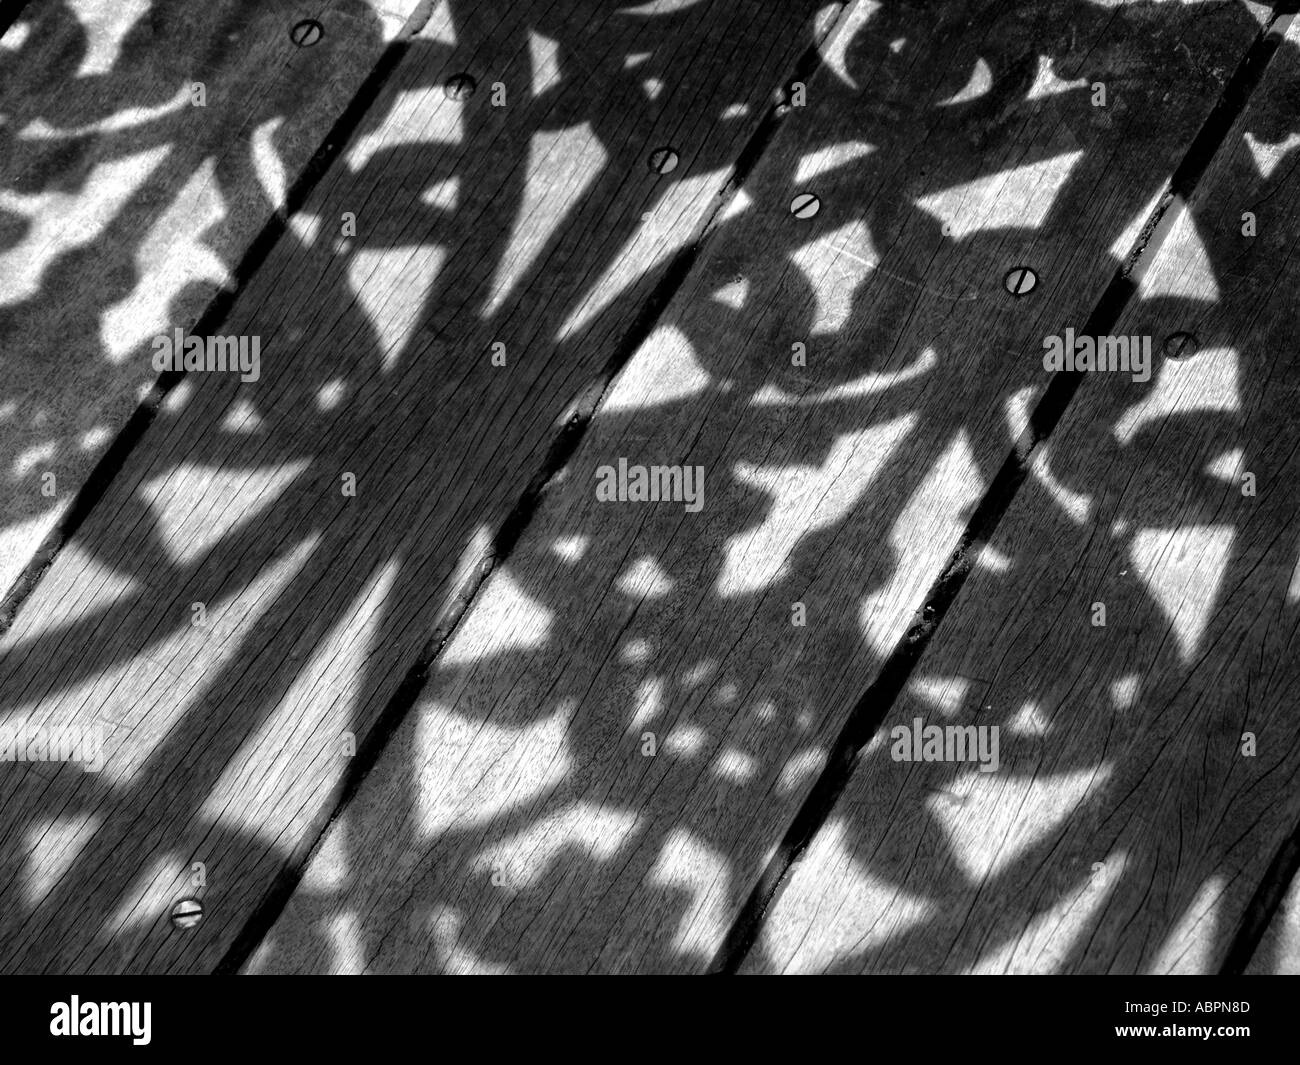 Shadows created from ornate victorian metal fencing Stock Photo